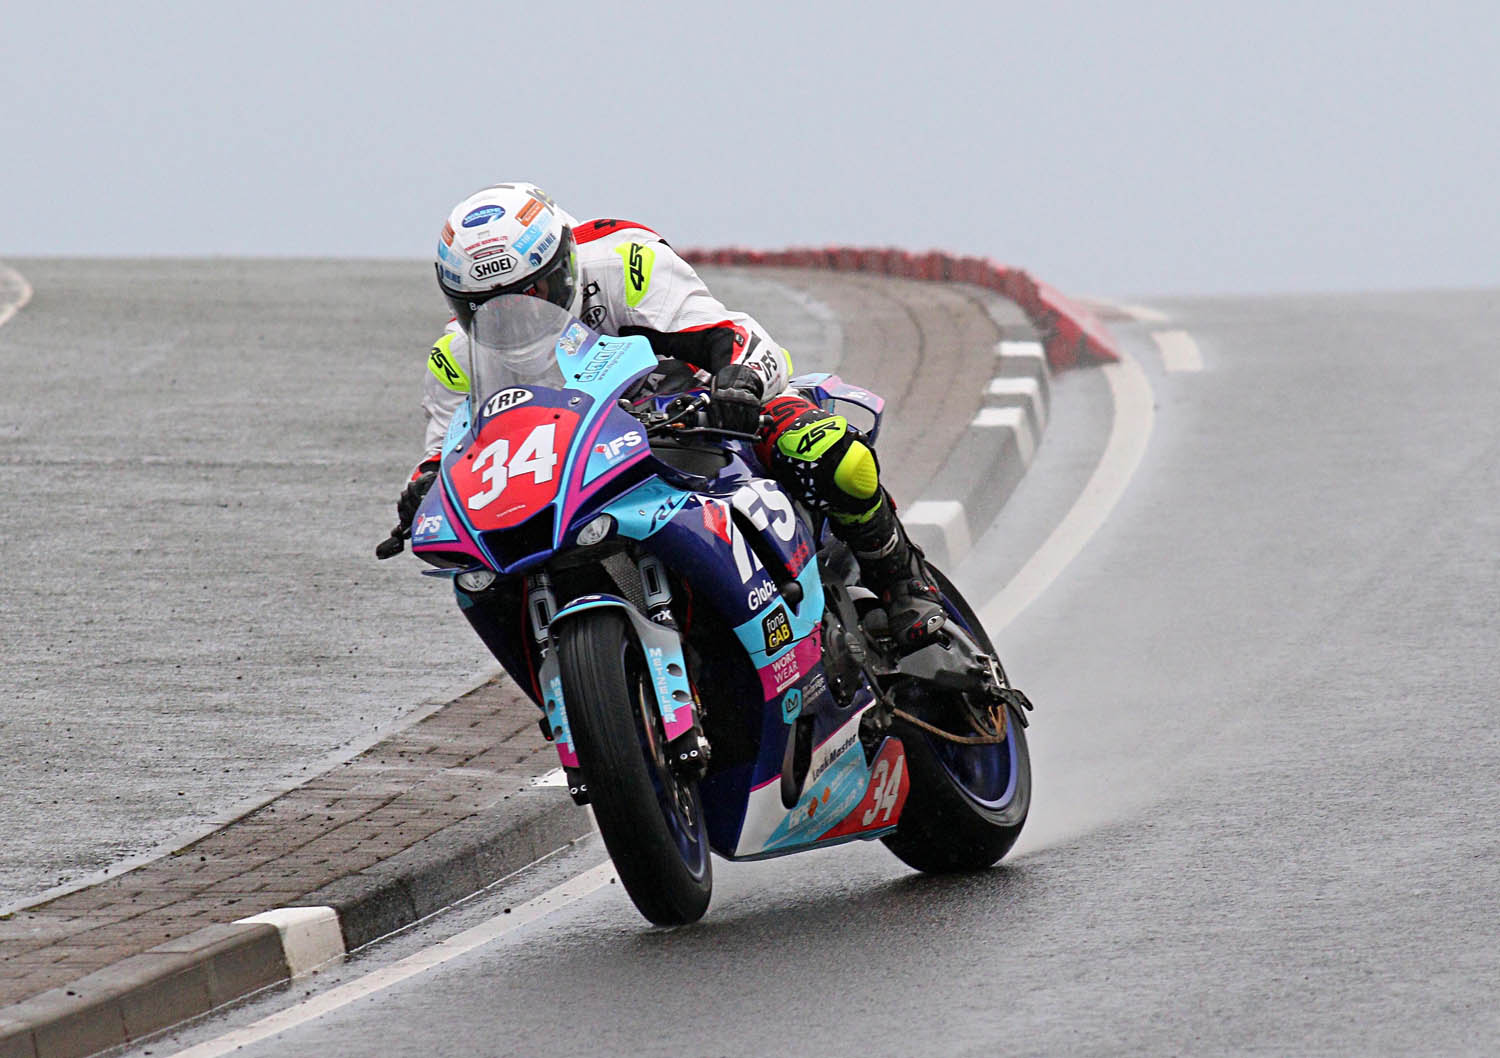 North West 200: Alastair Seeley does the double